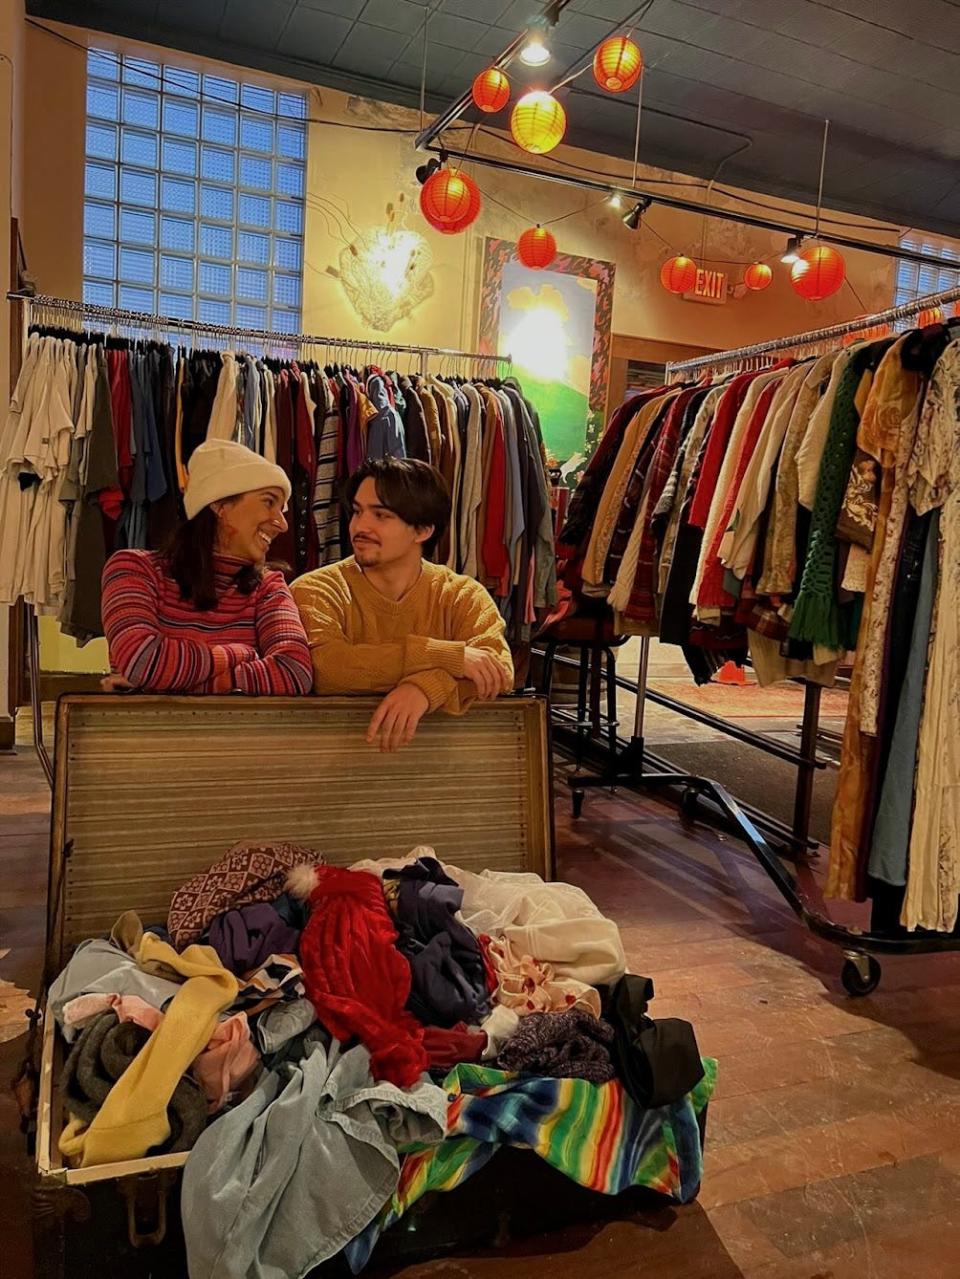 Two young entrepreneurs, Destiny Sawyer (left) and Aidan Sison (right) have started a vintage clothing business, Thrift Kist. They sell at events and organized the Cream City Vintage Fest, which is scheduled for Aug. 5 at the Baird Center.